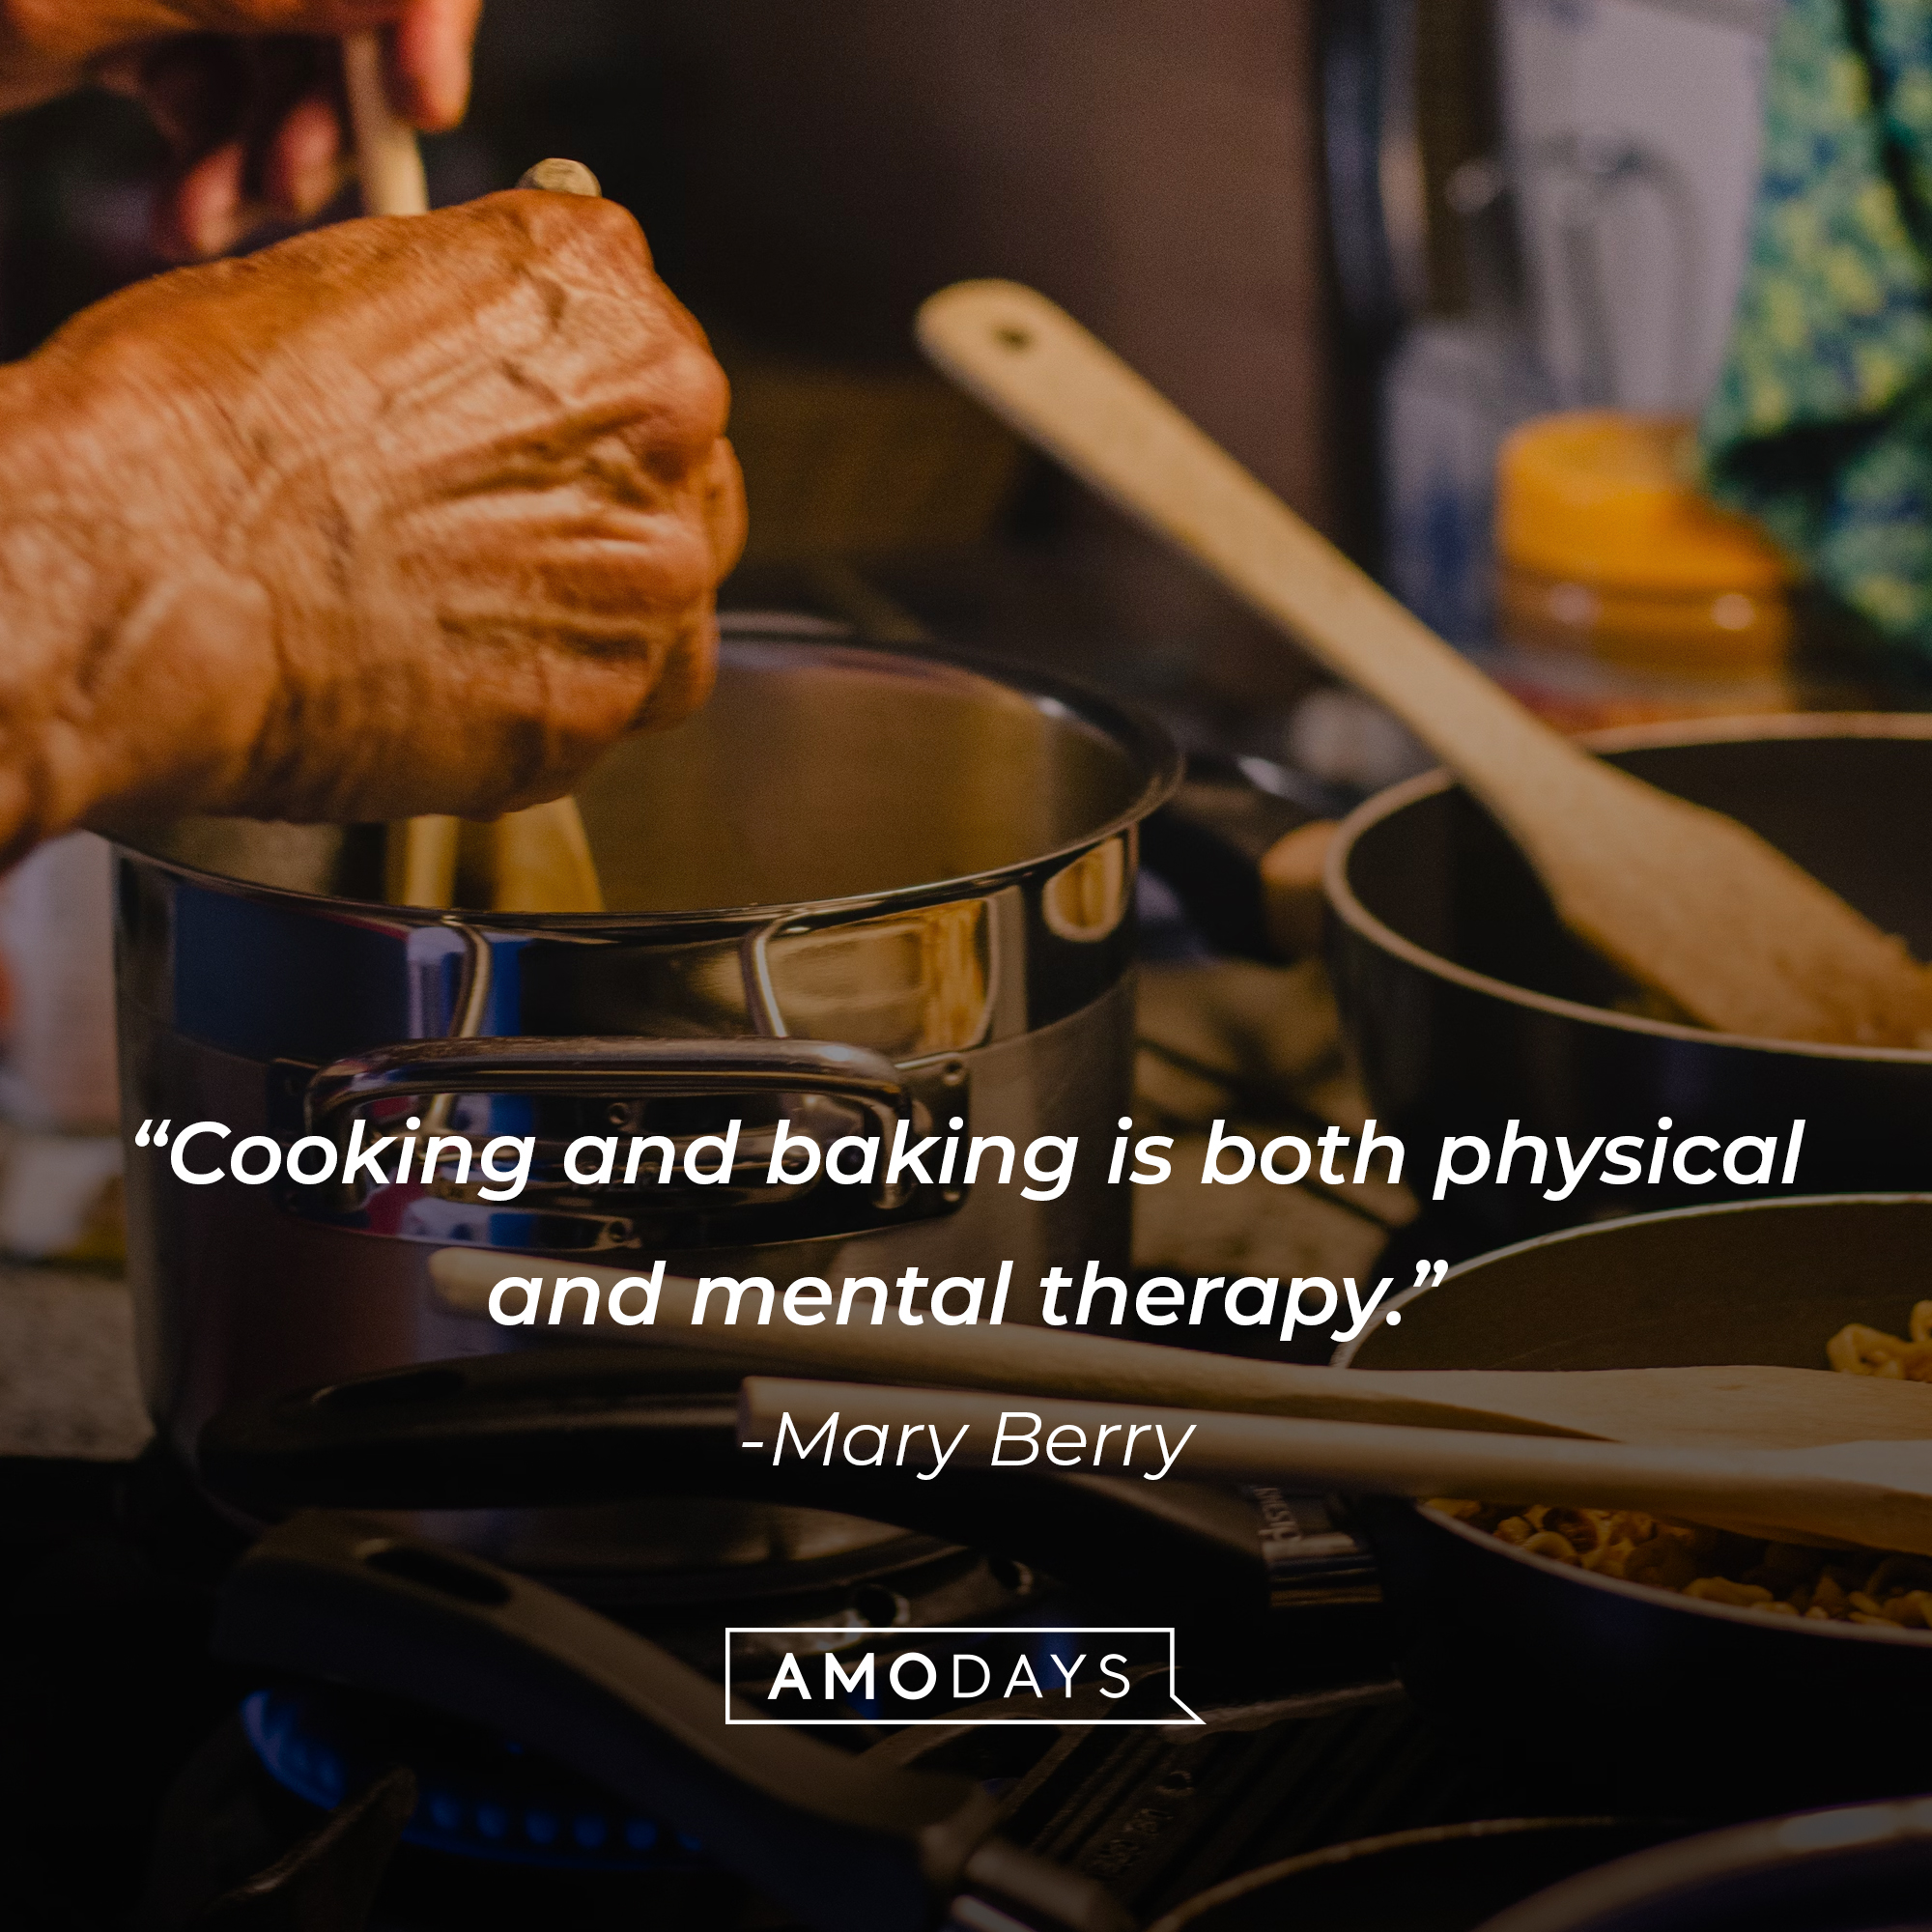 Mary Berry's quote: "Cooking and baking is both physical and mental therapy." Source: Brainyquote